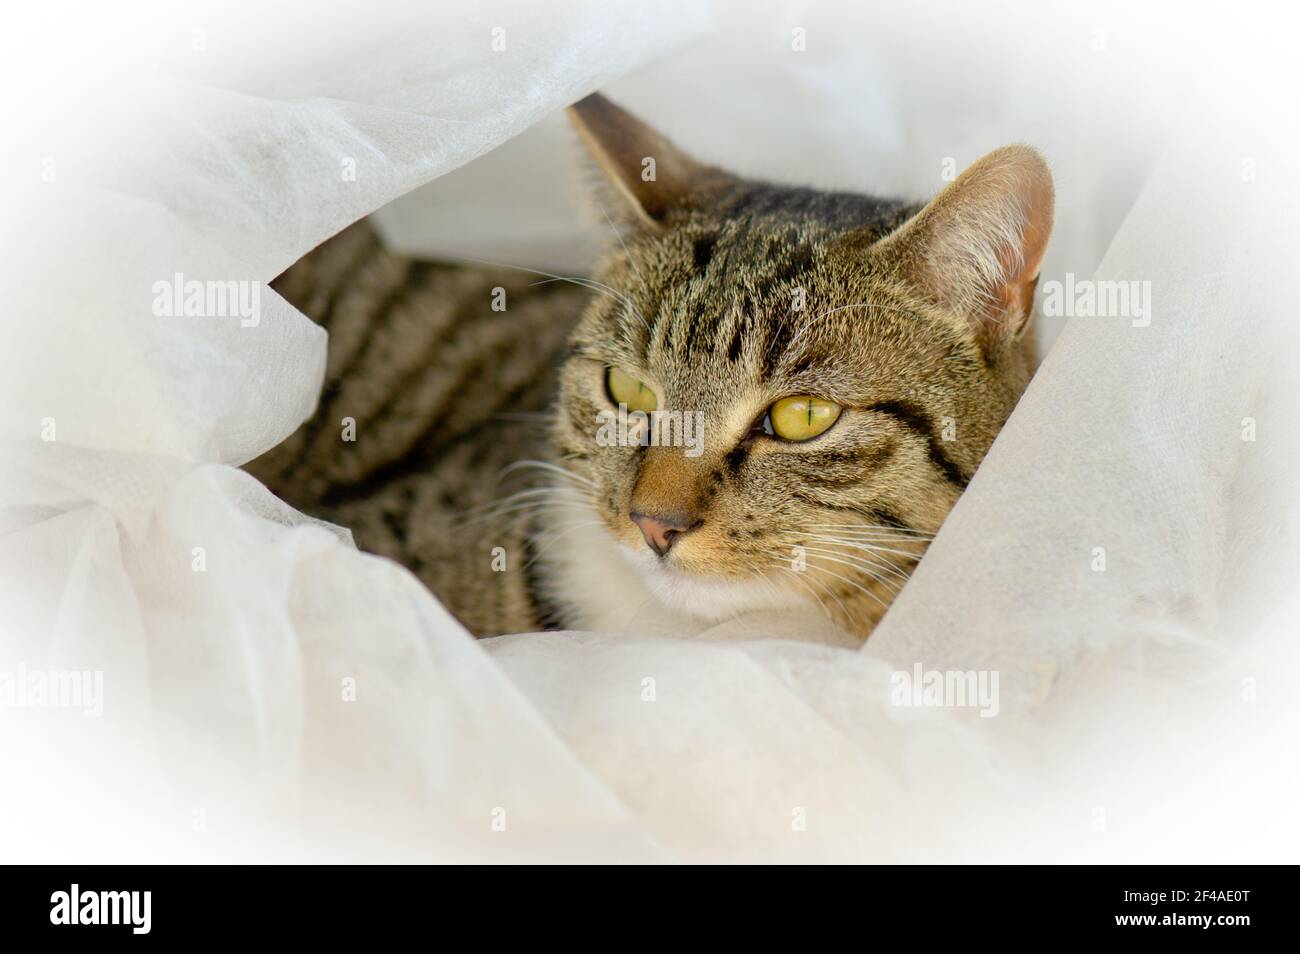 Close-up of female tabby cat lying snuggled up in white fleece looking away from camera content. Stock Photo